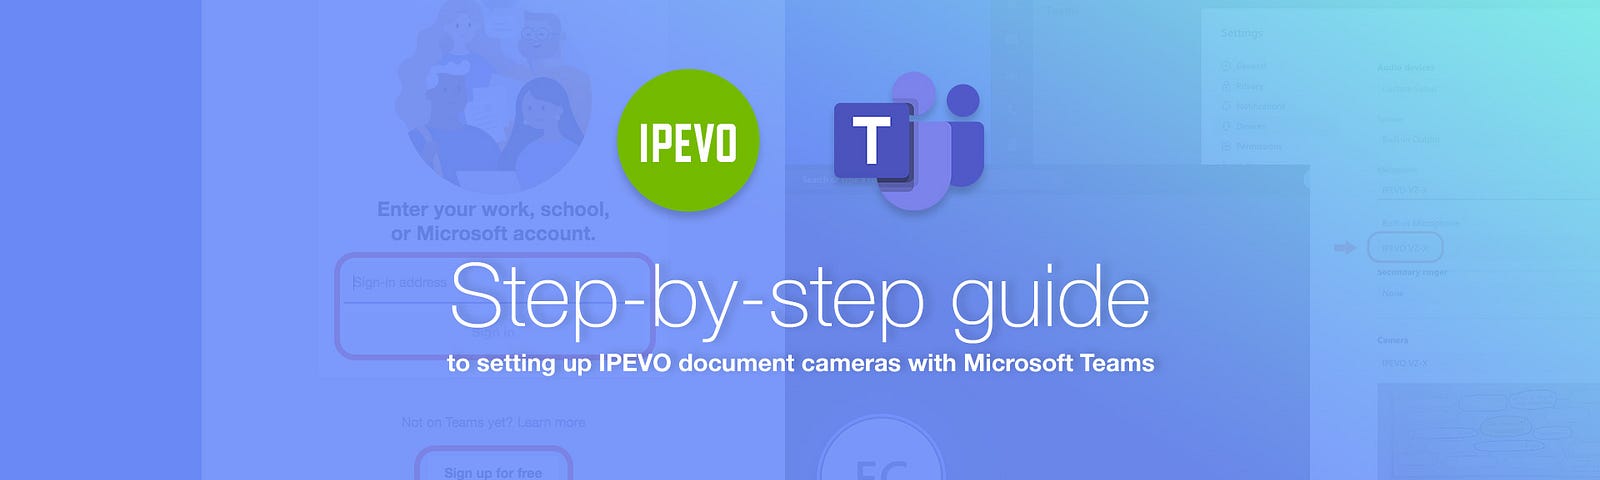 Step-by-step guide to setting up IPEVO document cameras with Microsoft Teams